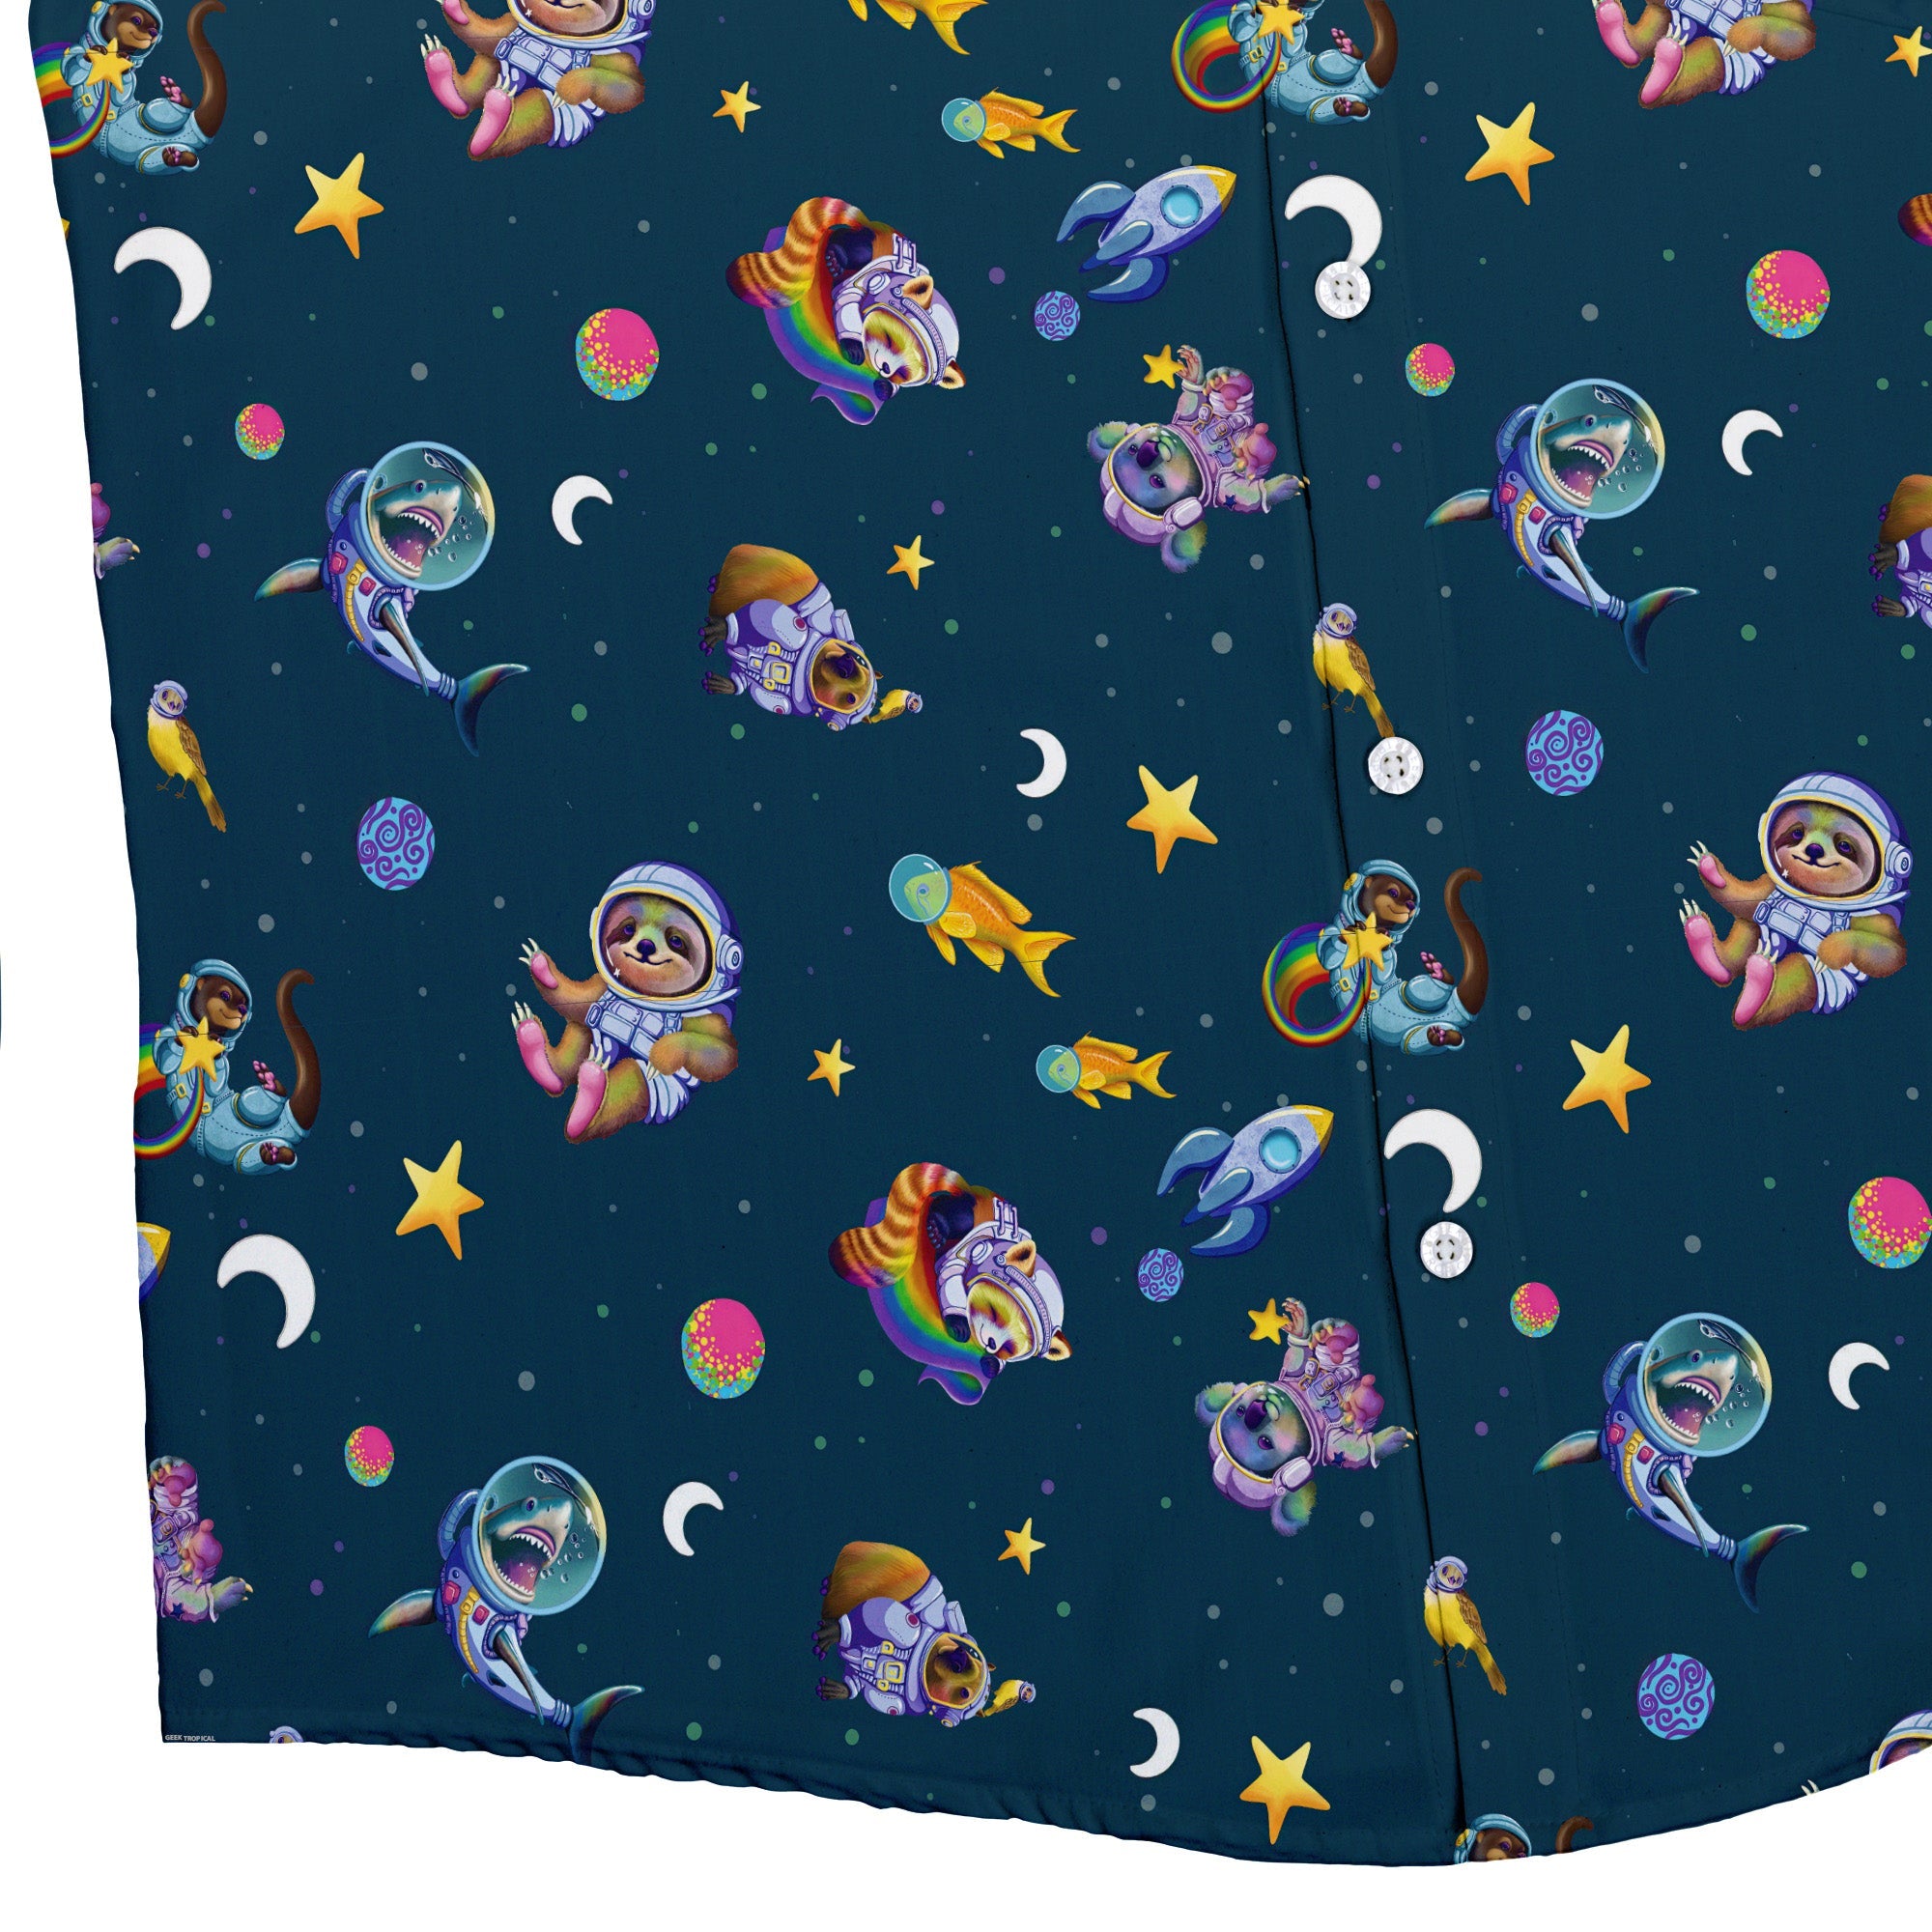 Animal Astronauts in Space Button Up Shirt - adult sizing - Animal Patterns - Design by Carla Morrow